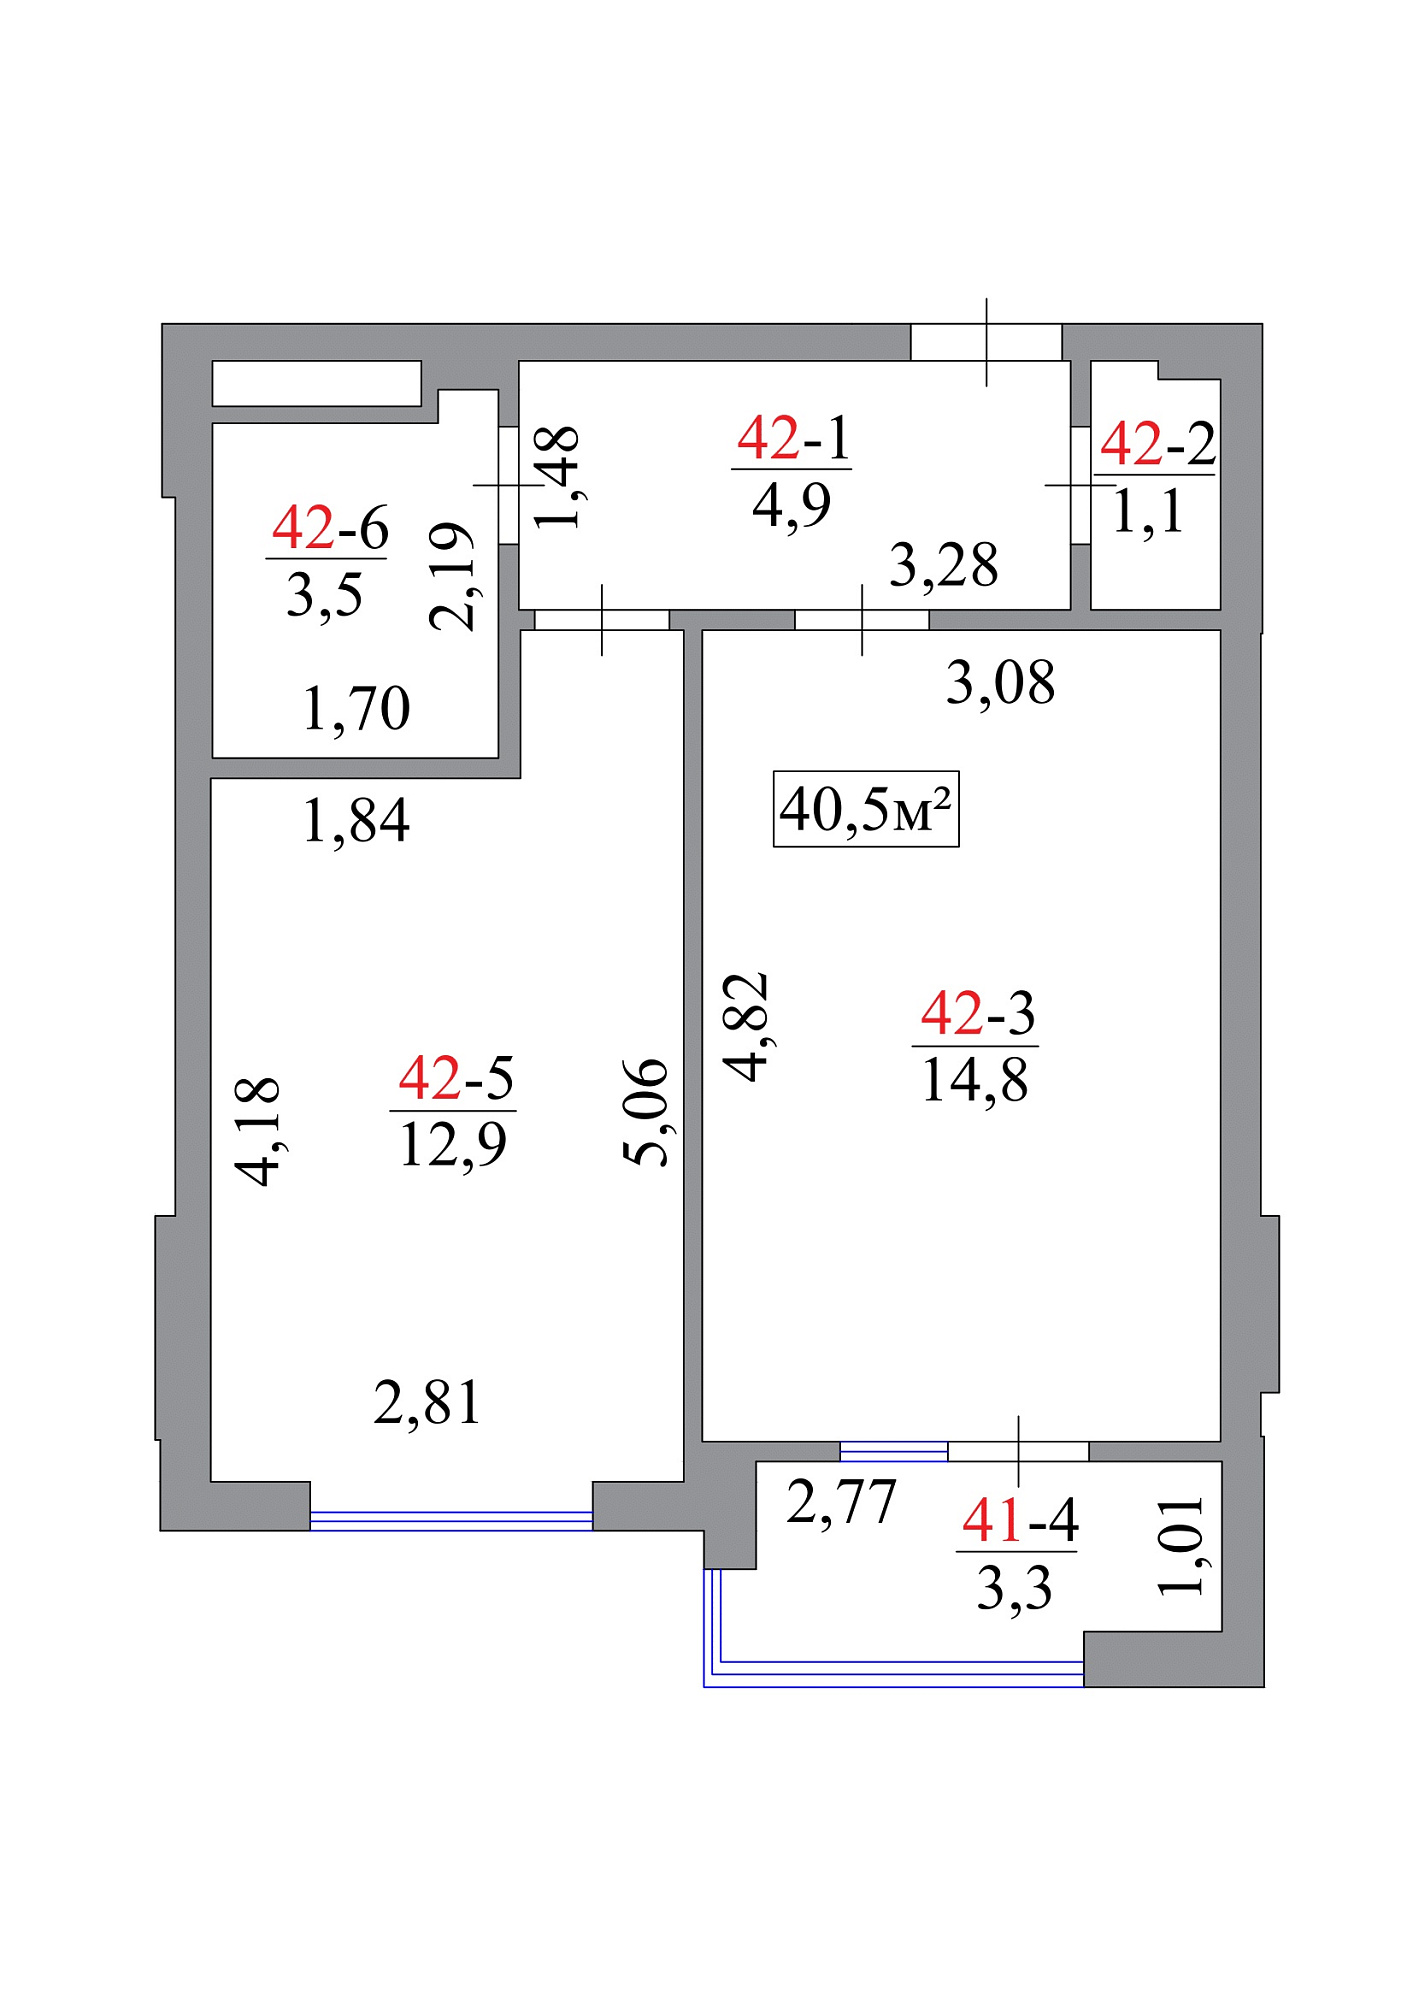 Planning 1-rm flats area 40.5m2, AB-07-05/00038.